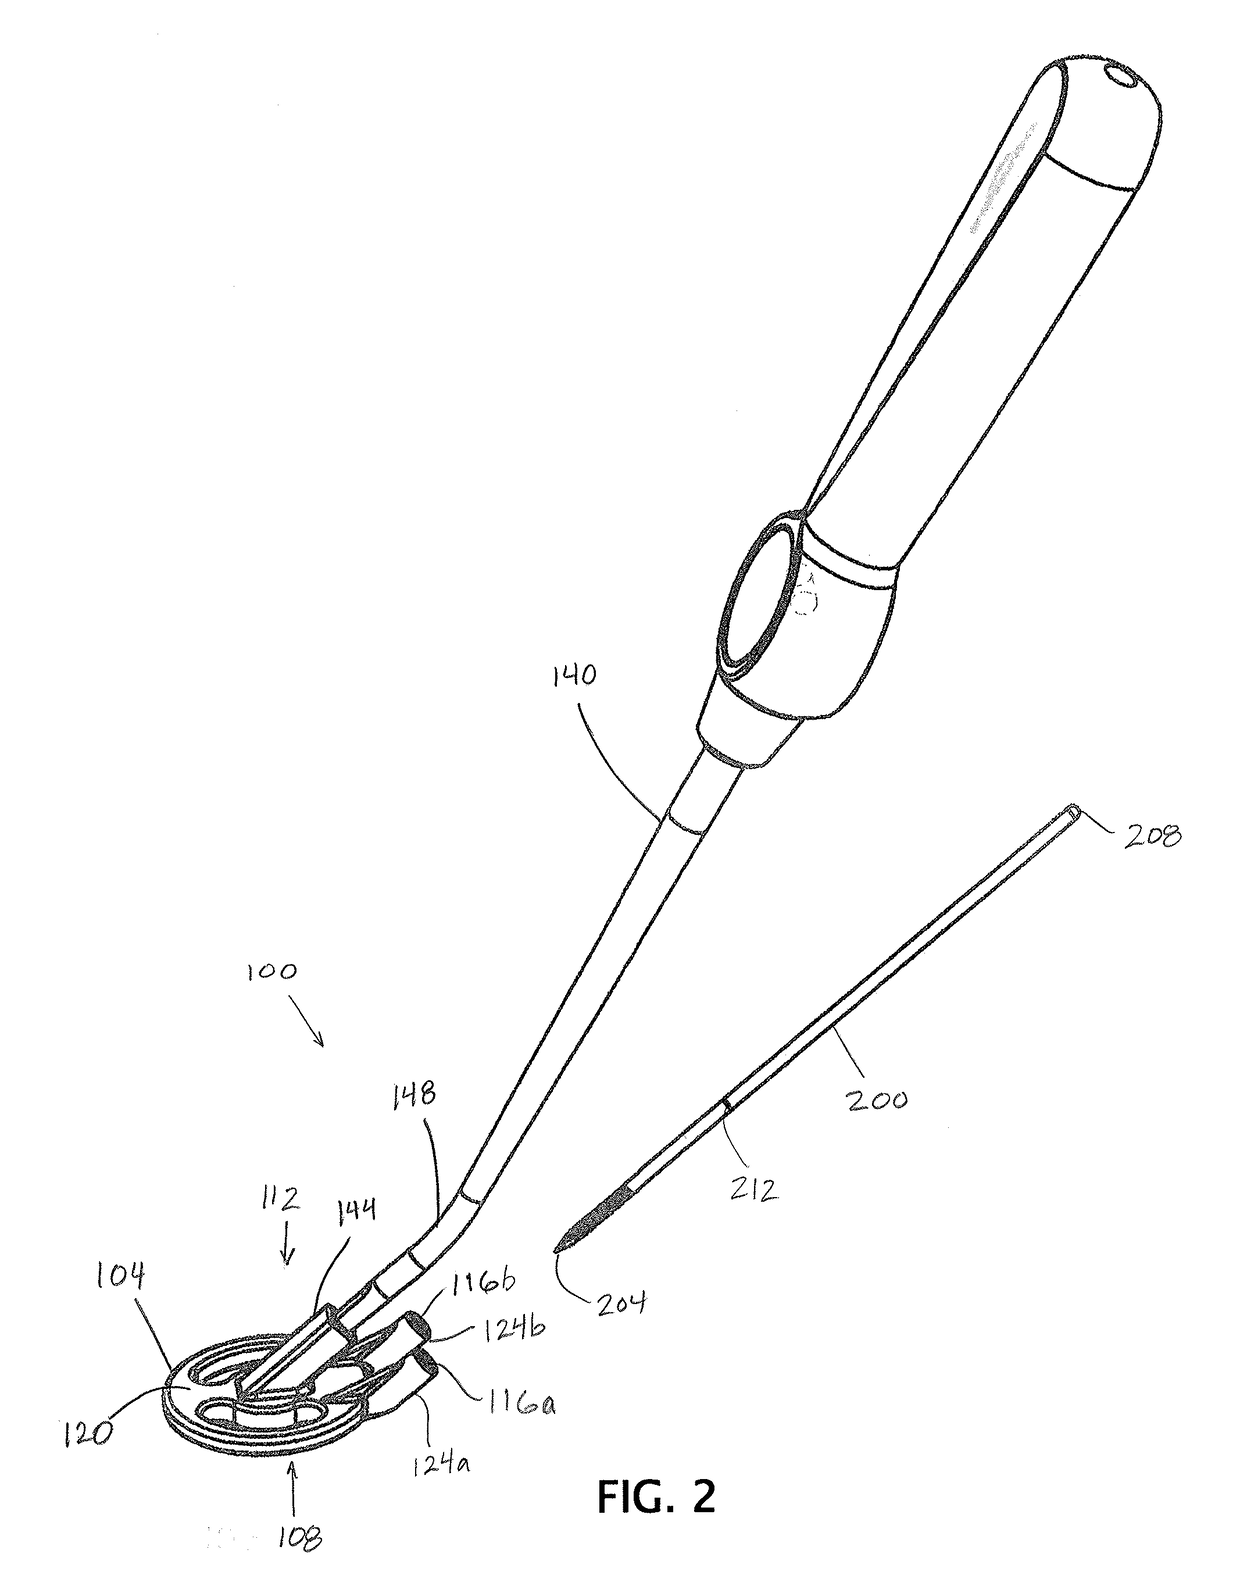 Devices, apparatuses, kits, and methods for repair of articular surface and/or articular rim